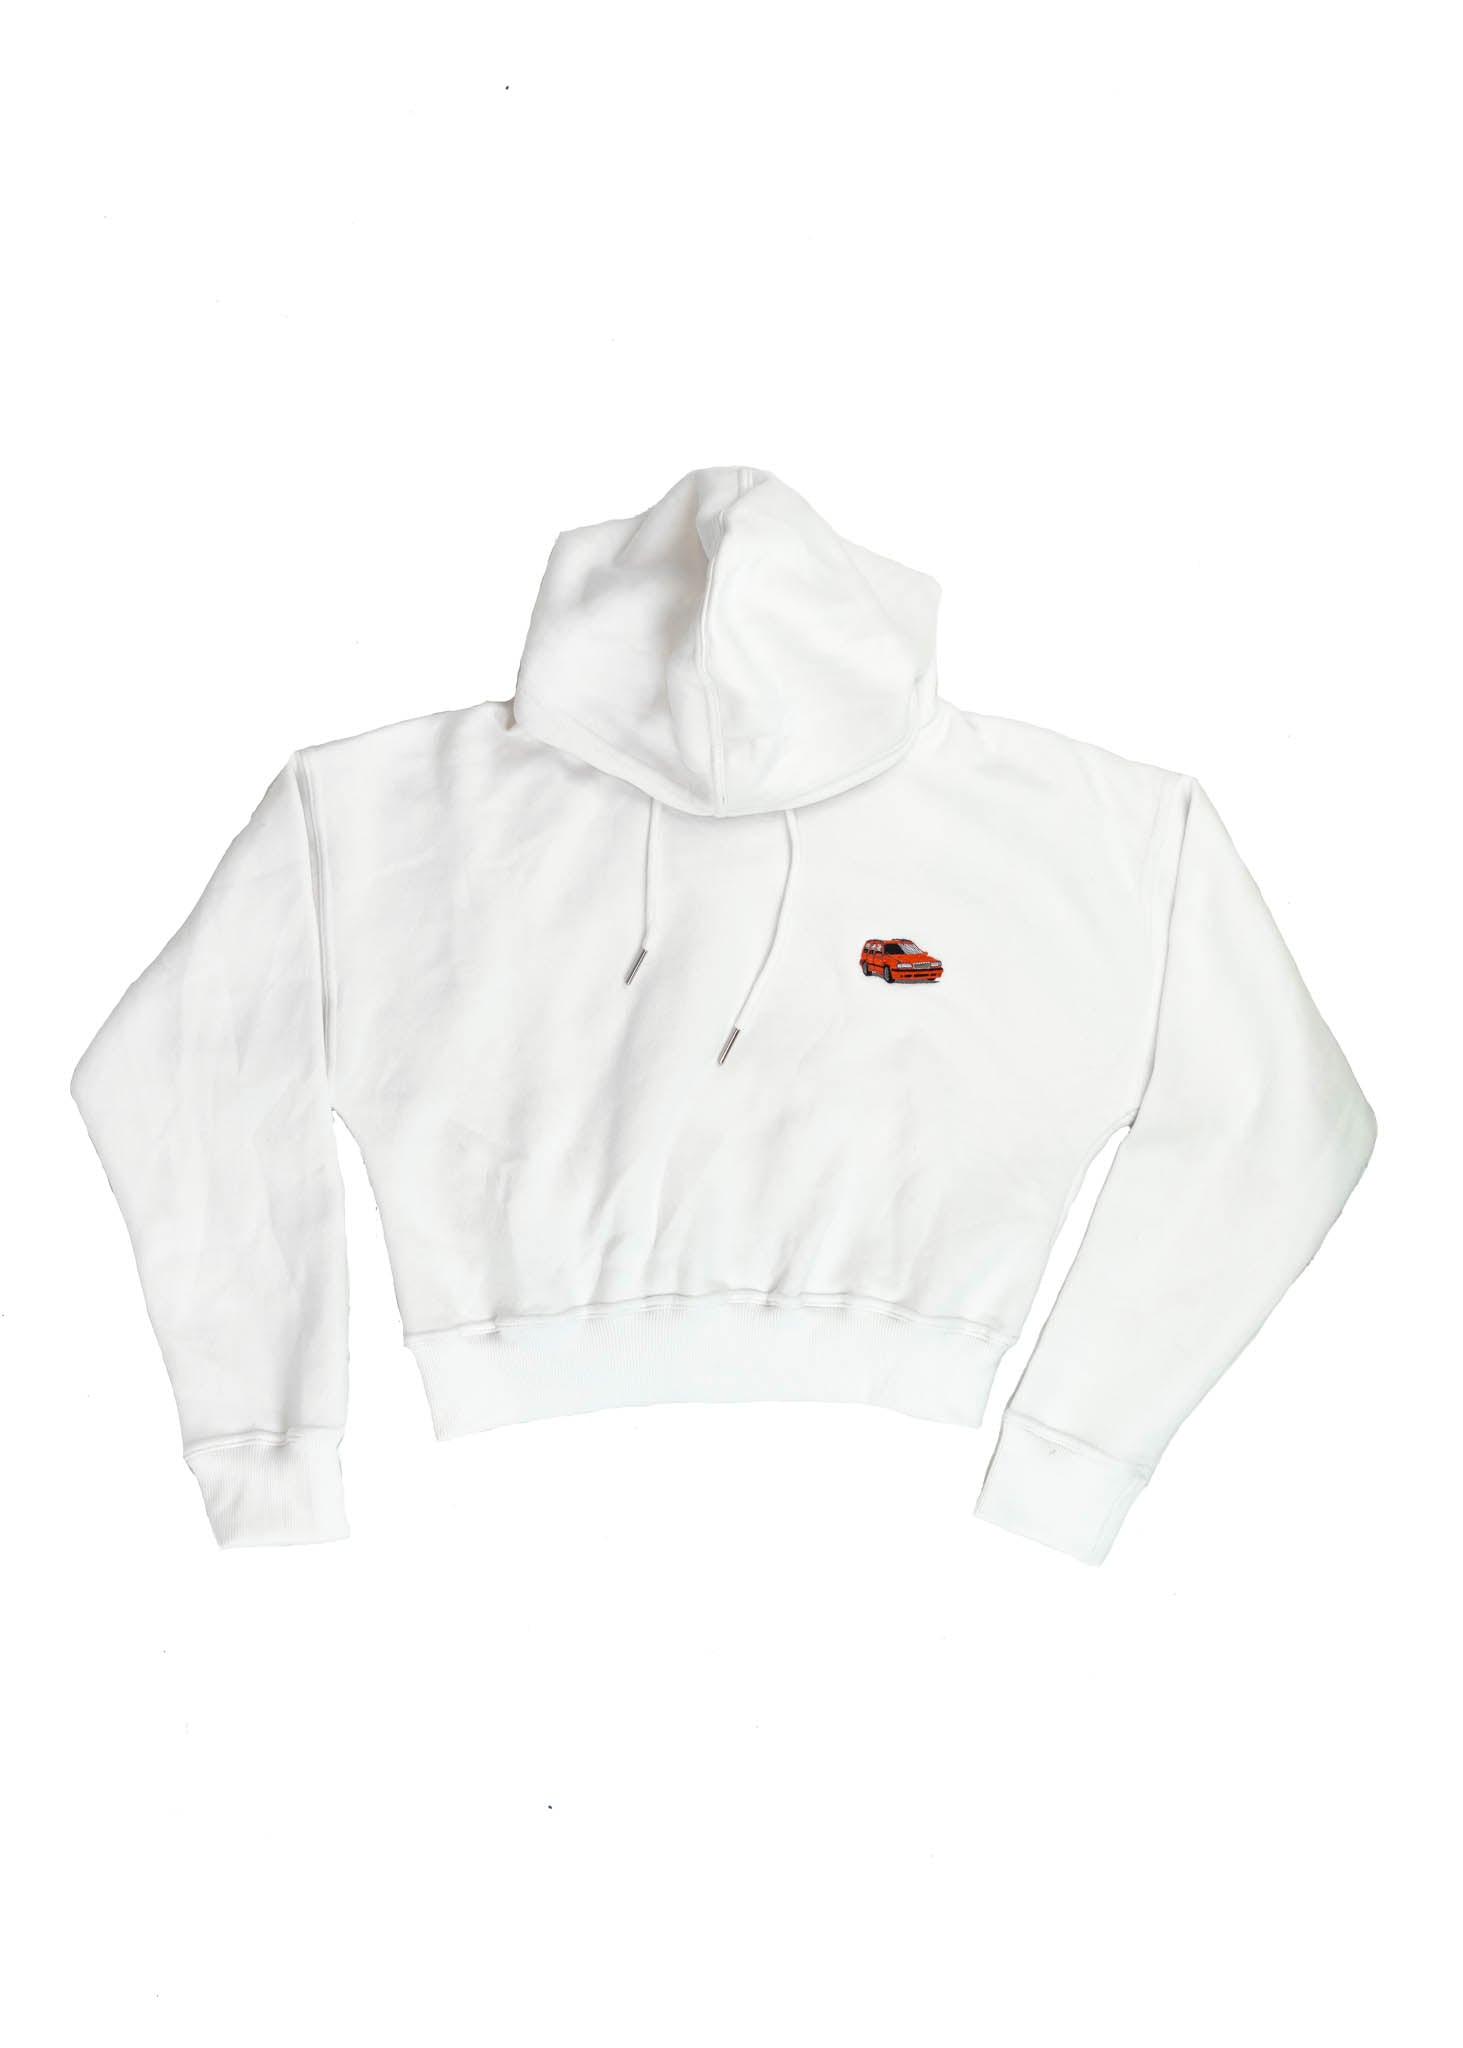 A white Volvo cropped hoodie for women. Photo is a front view of the cropped sweater with an embroidered 850R. Fabric composition is 100% cotton. The material is soft, comfortable, breathable, and non-transparent. The style of this crop hoodie is long sleeve, crewneck with a hood, hooded, with embroidery on the chest.